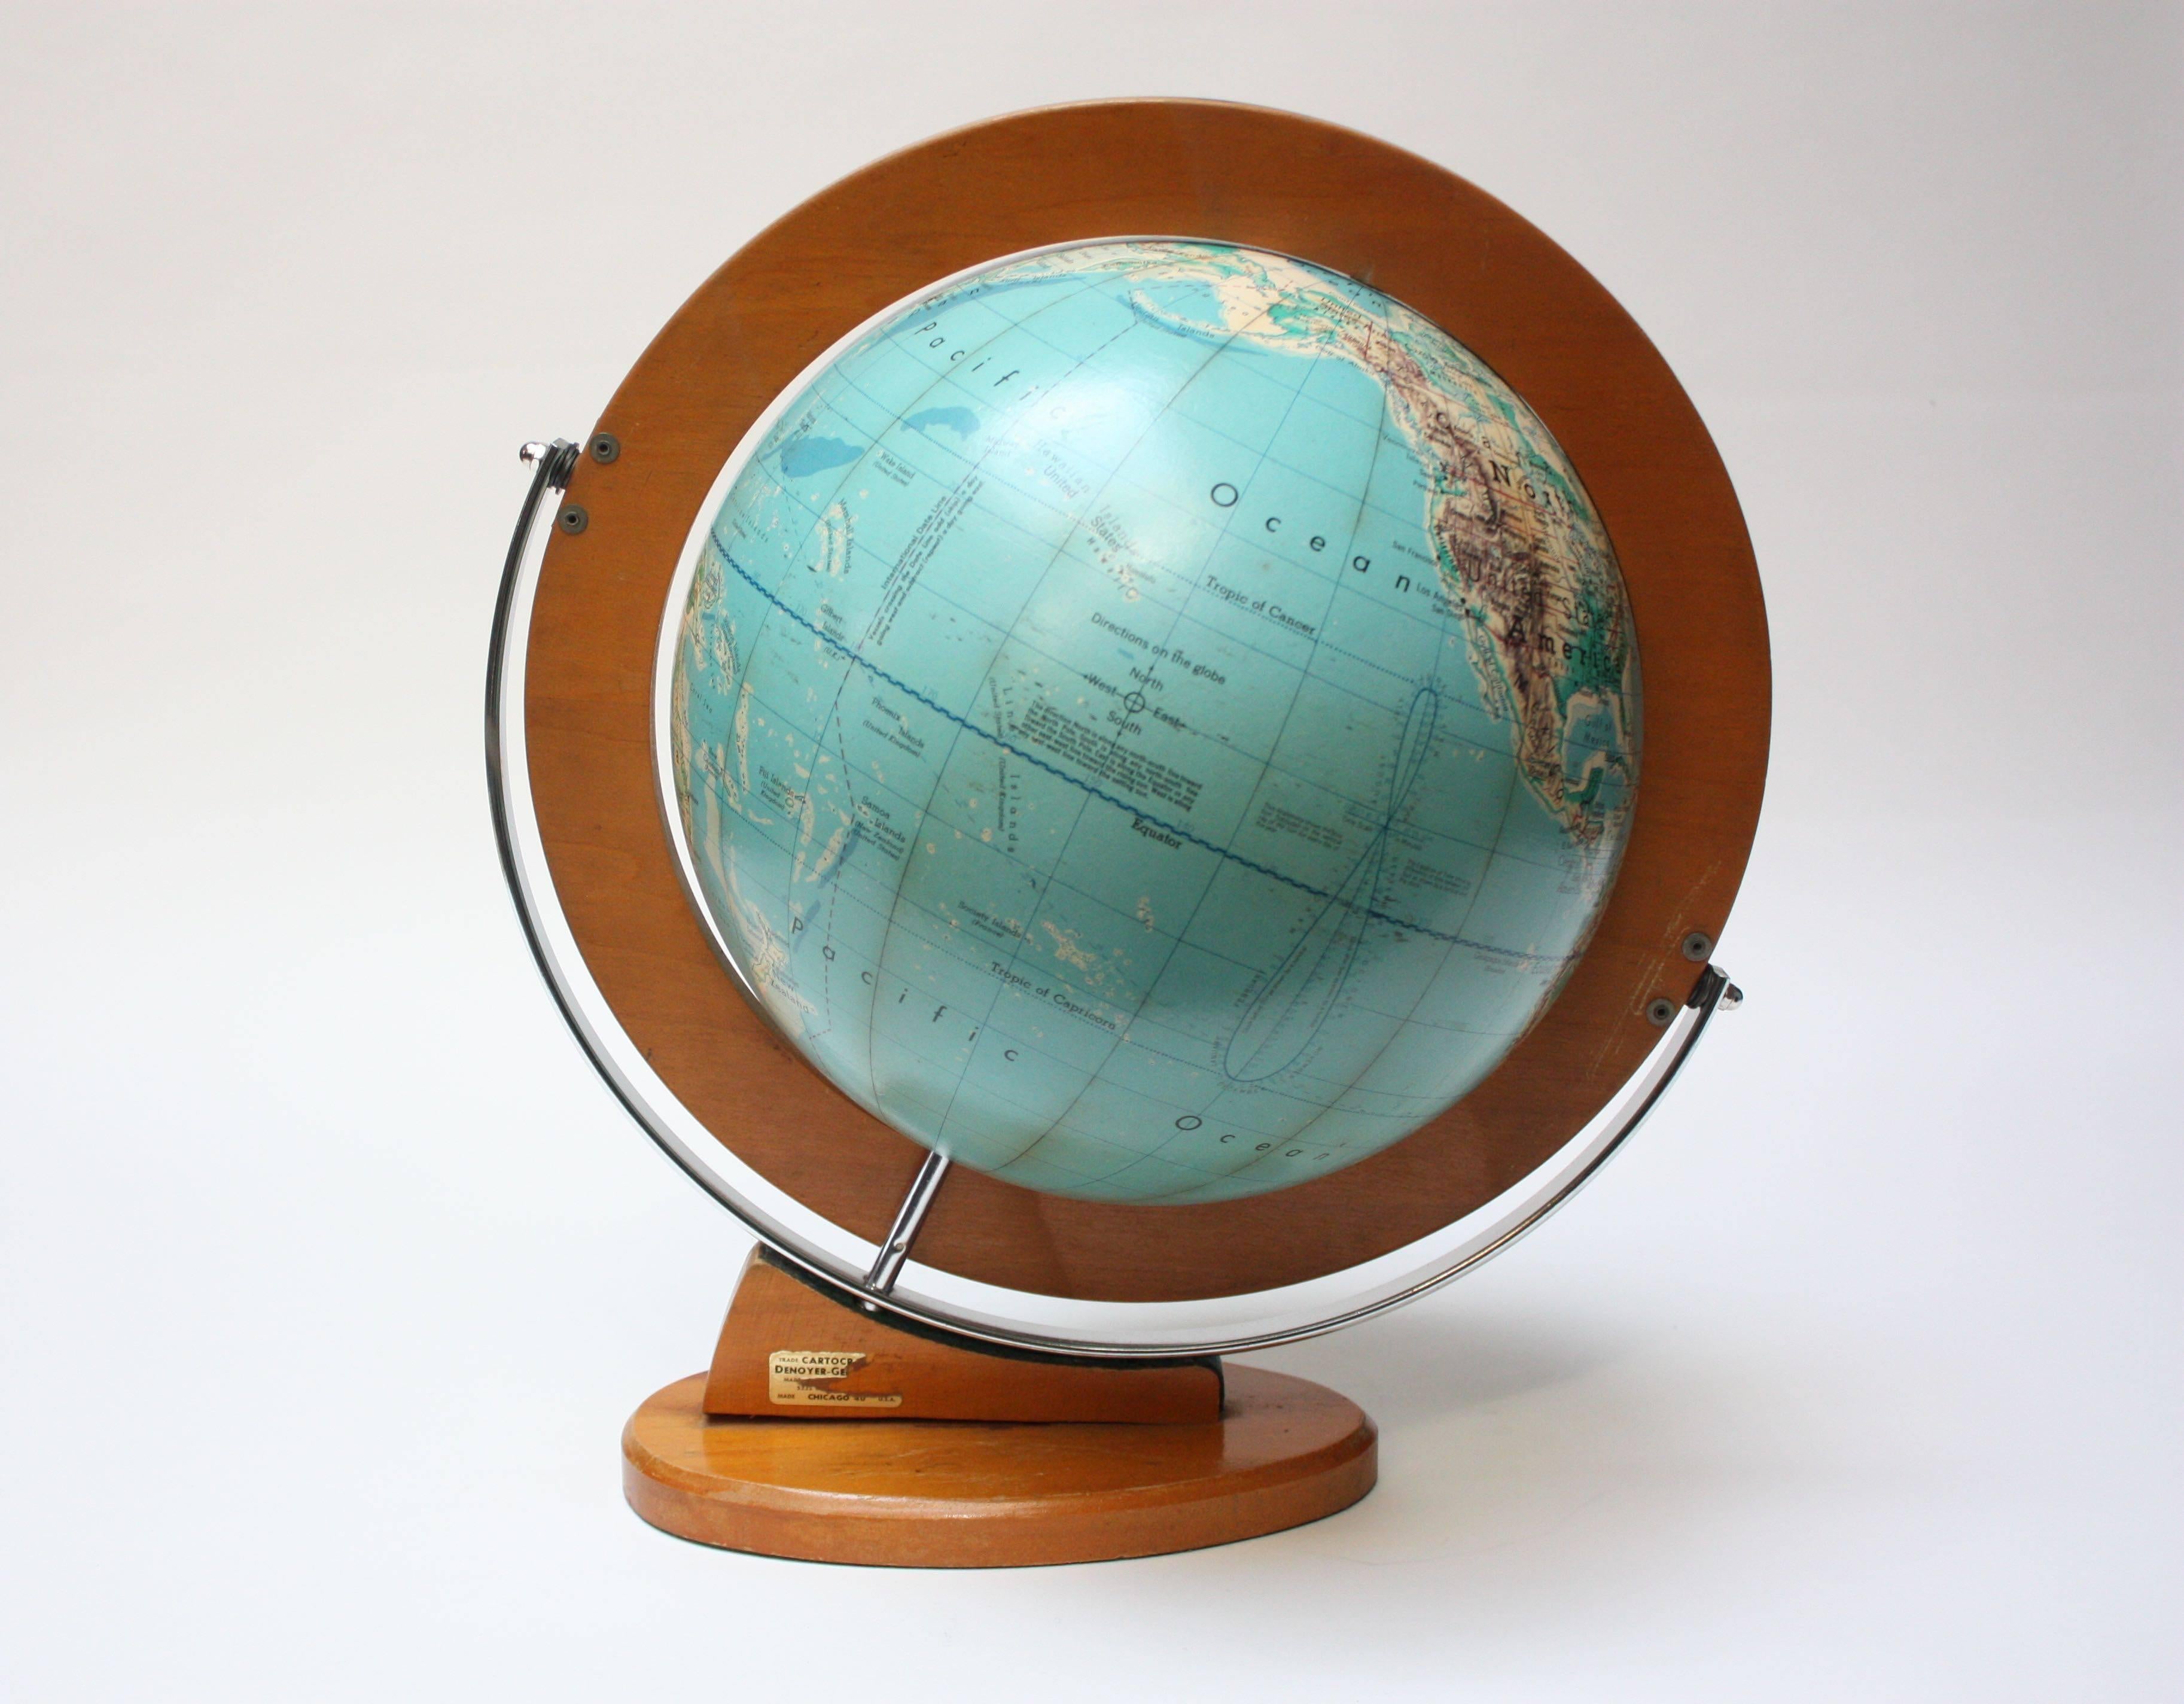 Denoyer-Geppert Co. of Chicago, IL 'Cartocraft 12 inch Visual Relief Globe' composed of paper gores over plastic, featuring the basic details of a student demonstration globe: International Date Line, Ecliptic and analemma. Adjustable, wood horizon